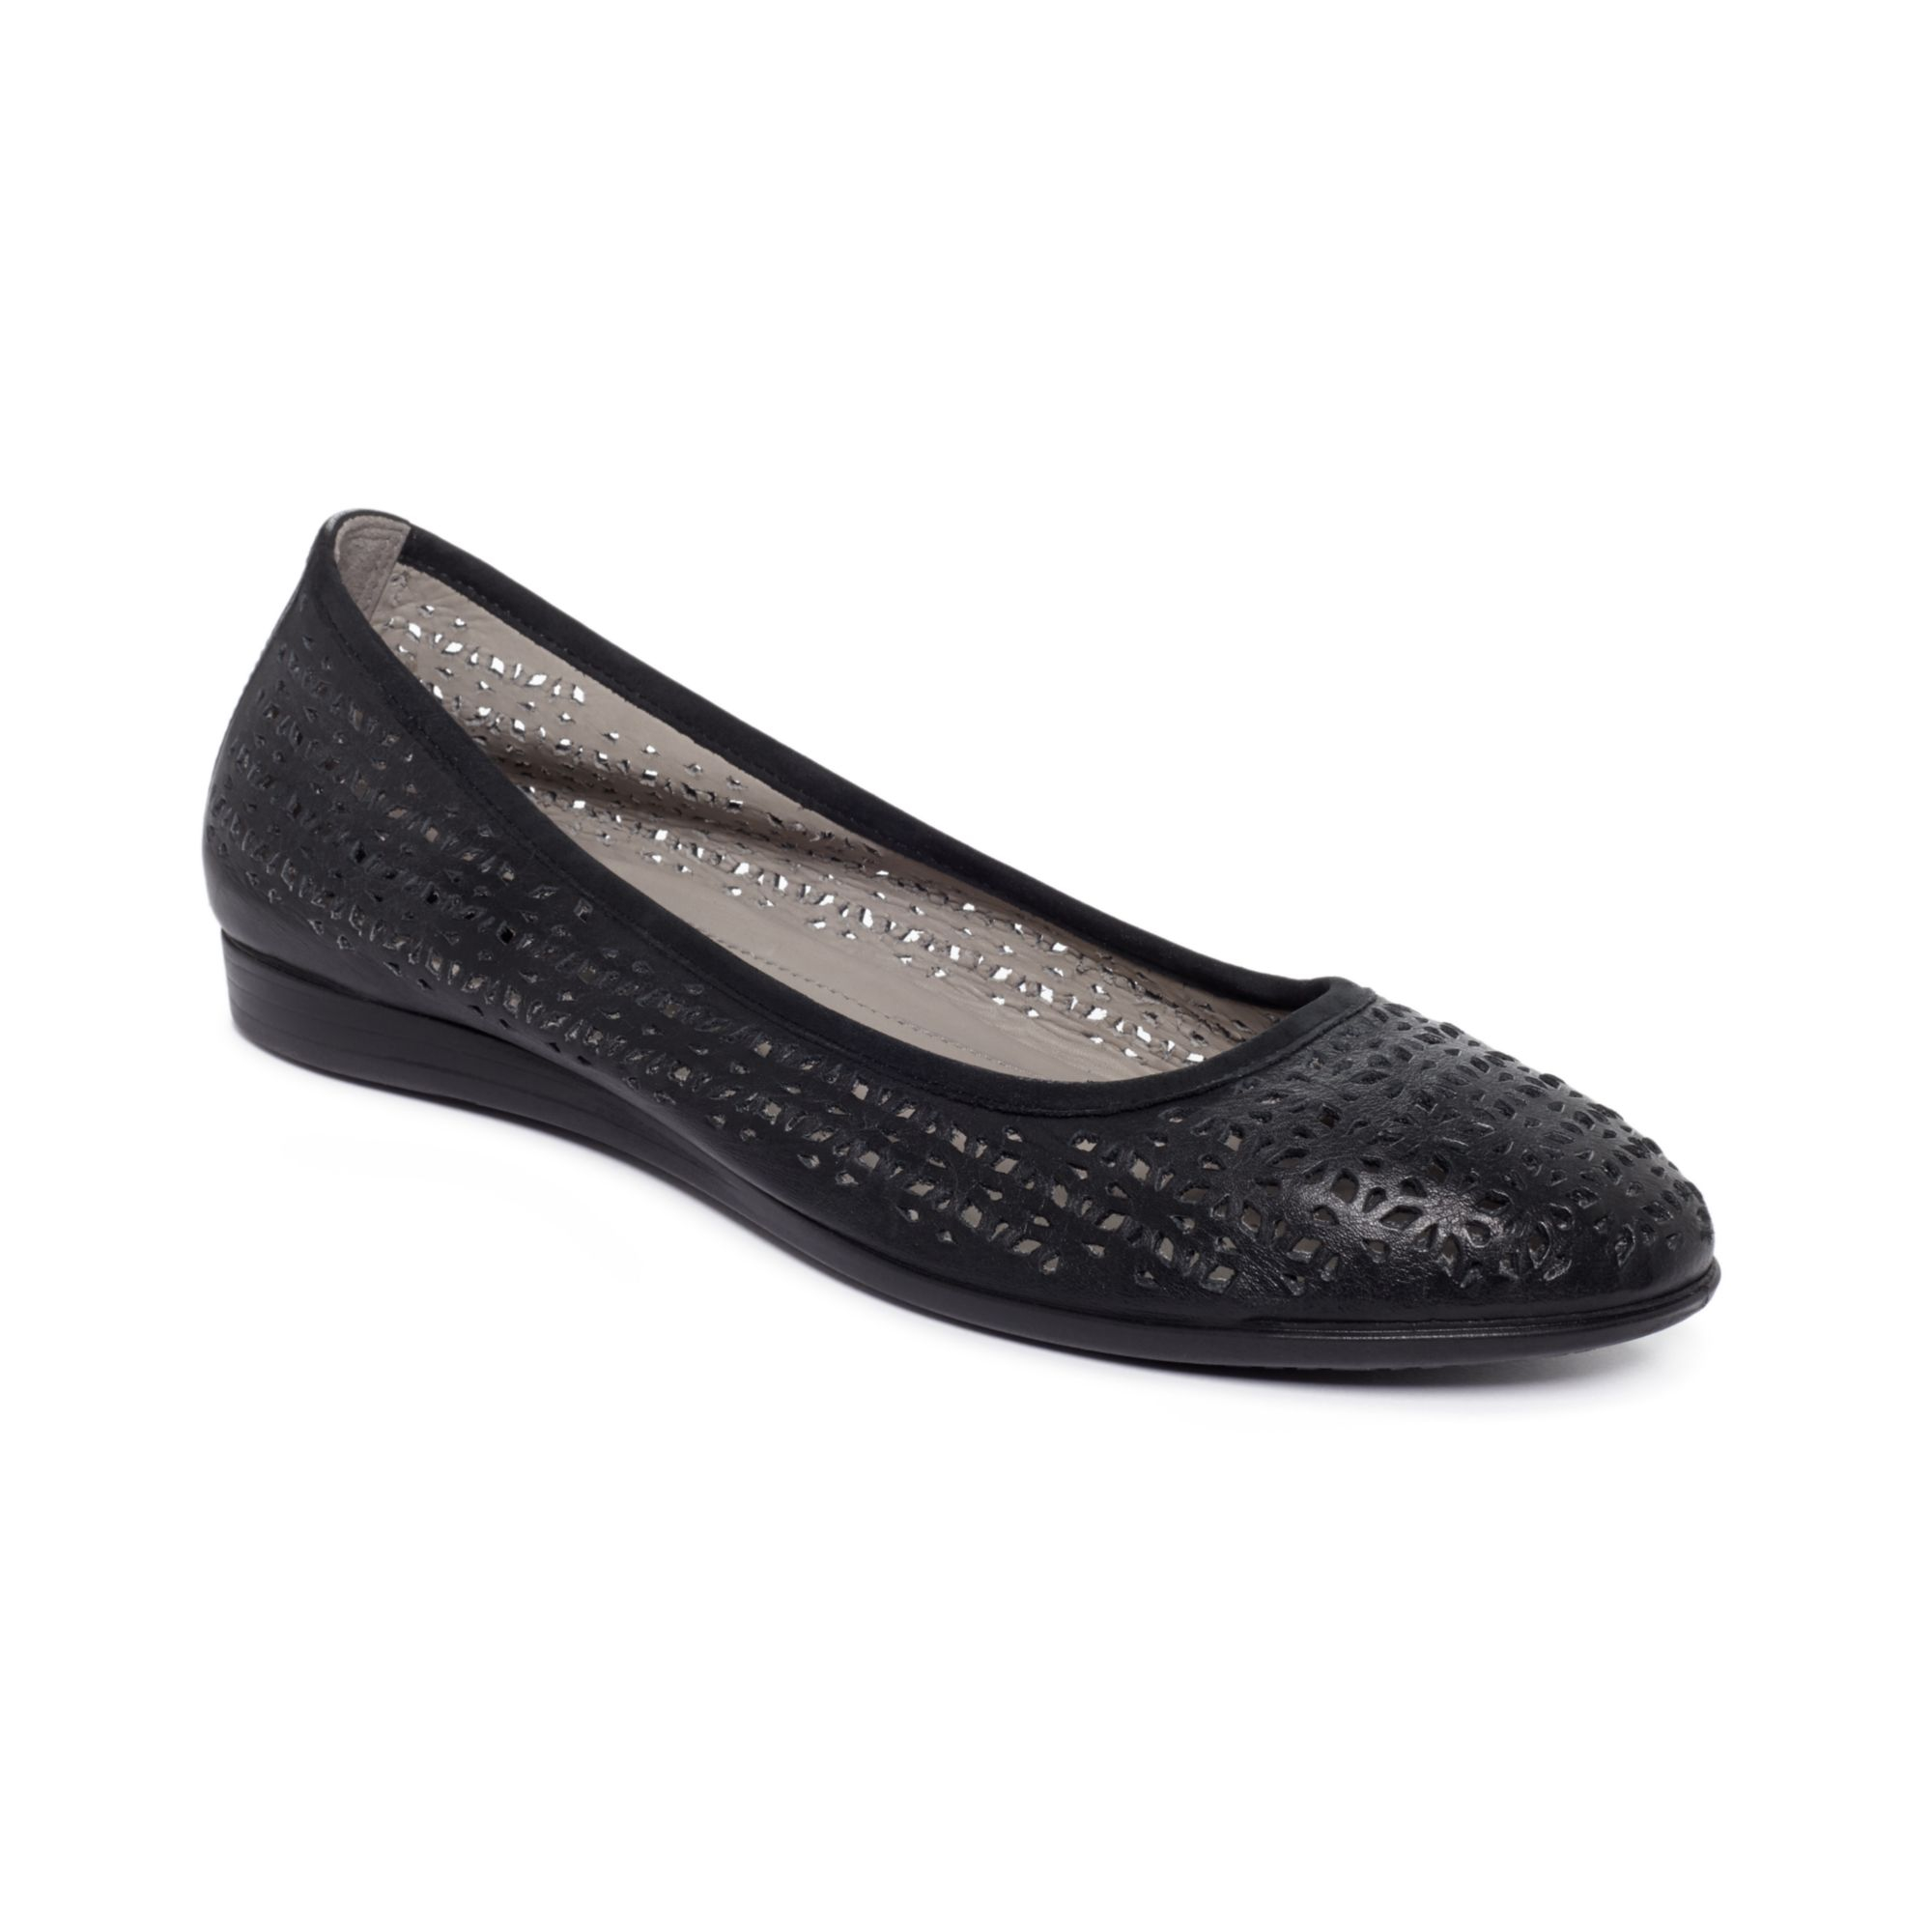 Lyst - Ecco Womens Touch 15 Flats in Black